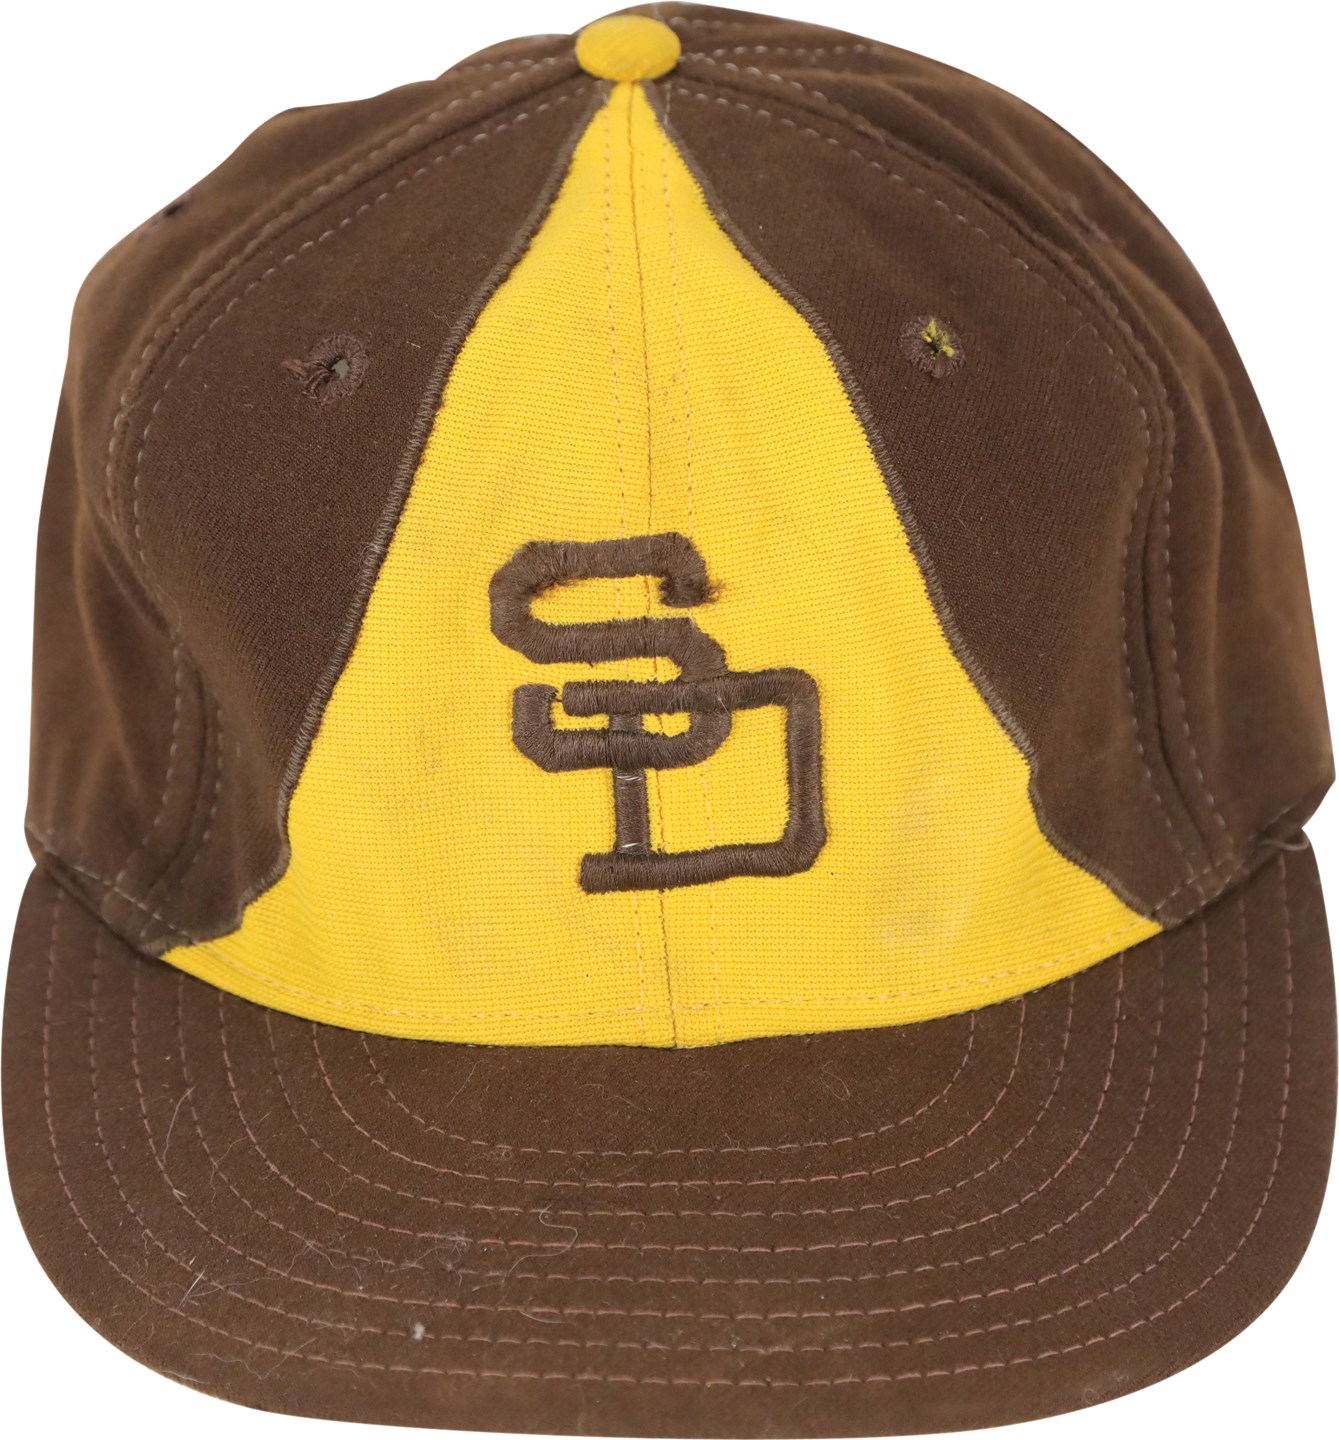 - Circa 1978 Gaylord Perry San Diego Padres Game Worn Hat